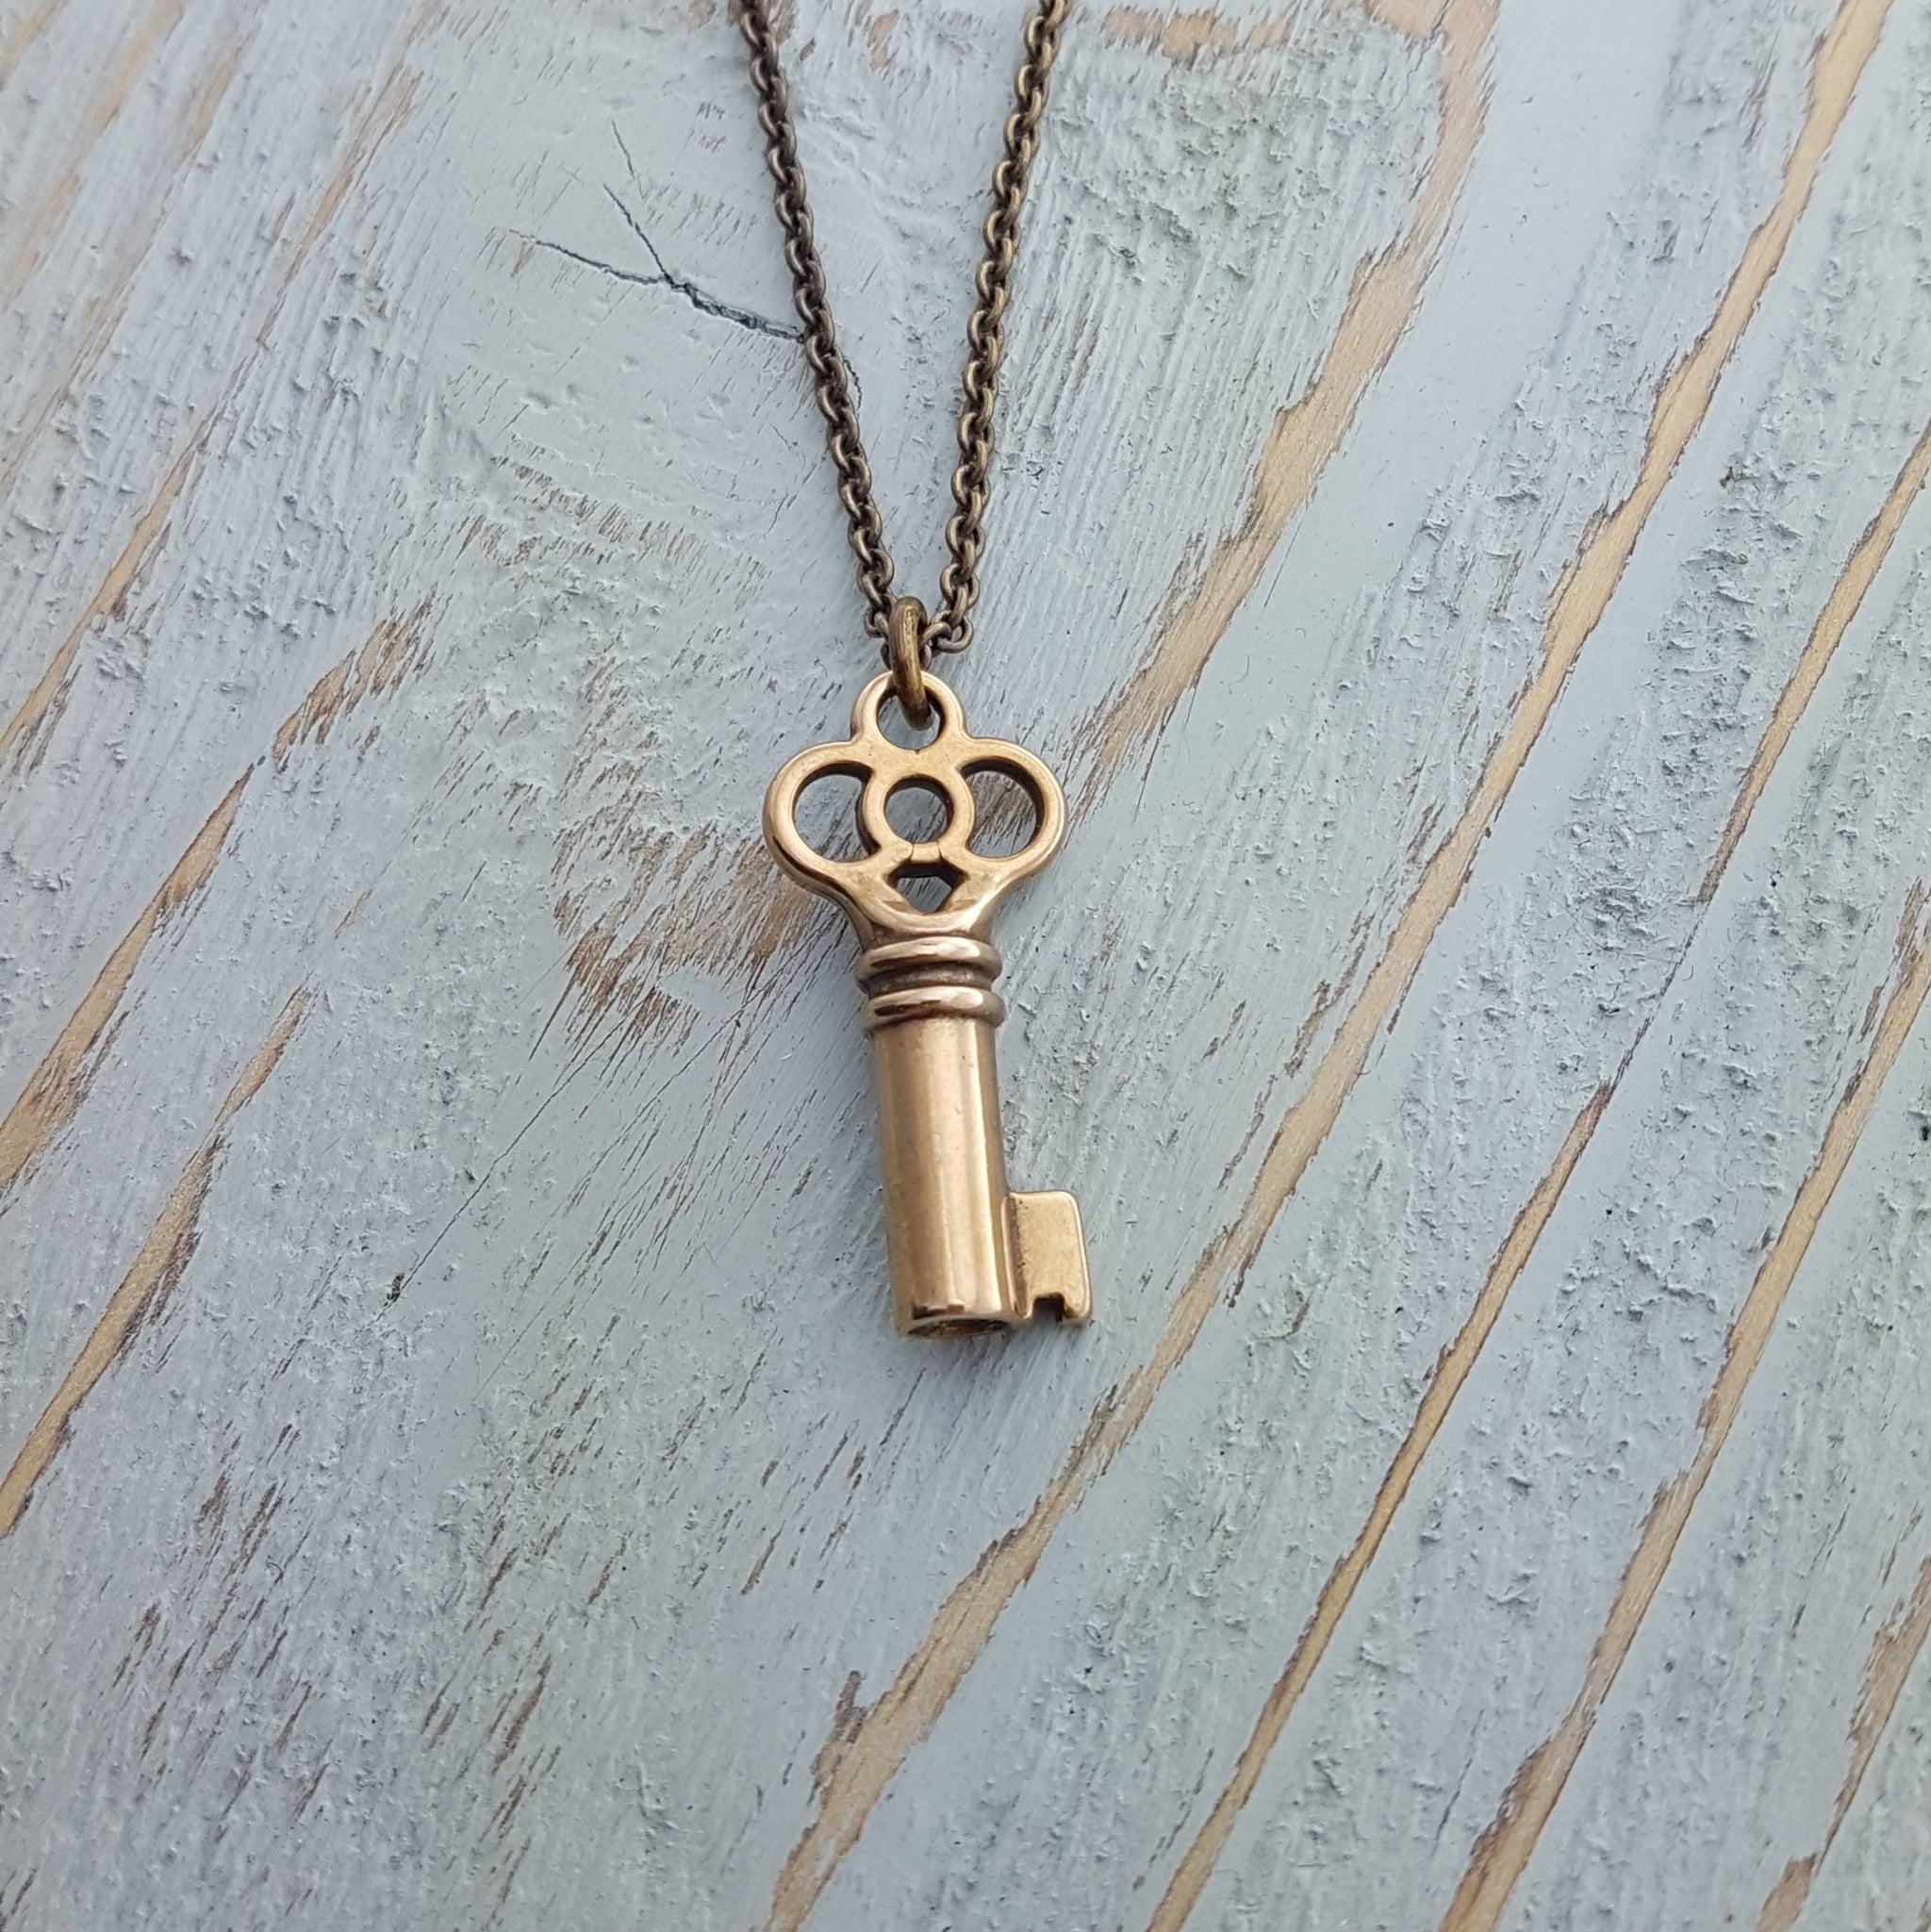 Clover Key Necklace - Gwen Delicious Jewelry Designs